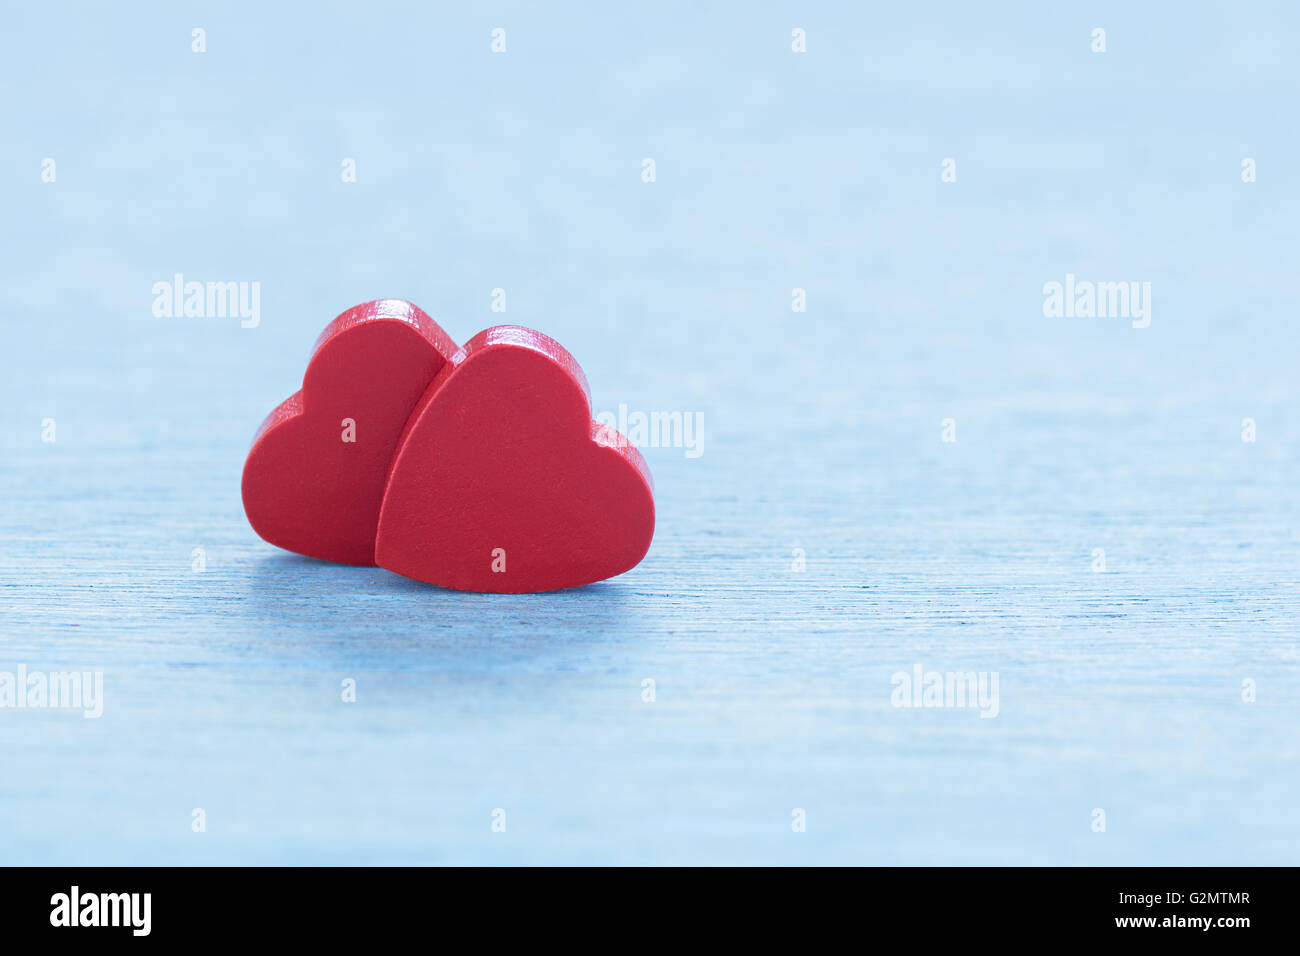 Valentine greeting card or voucher with two red hearts. Stock Photo